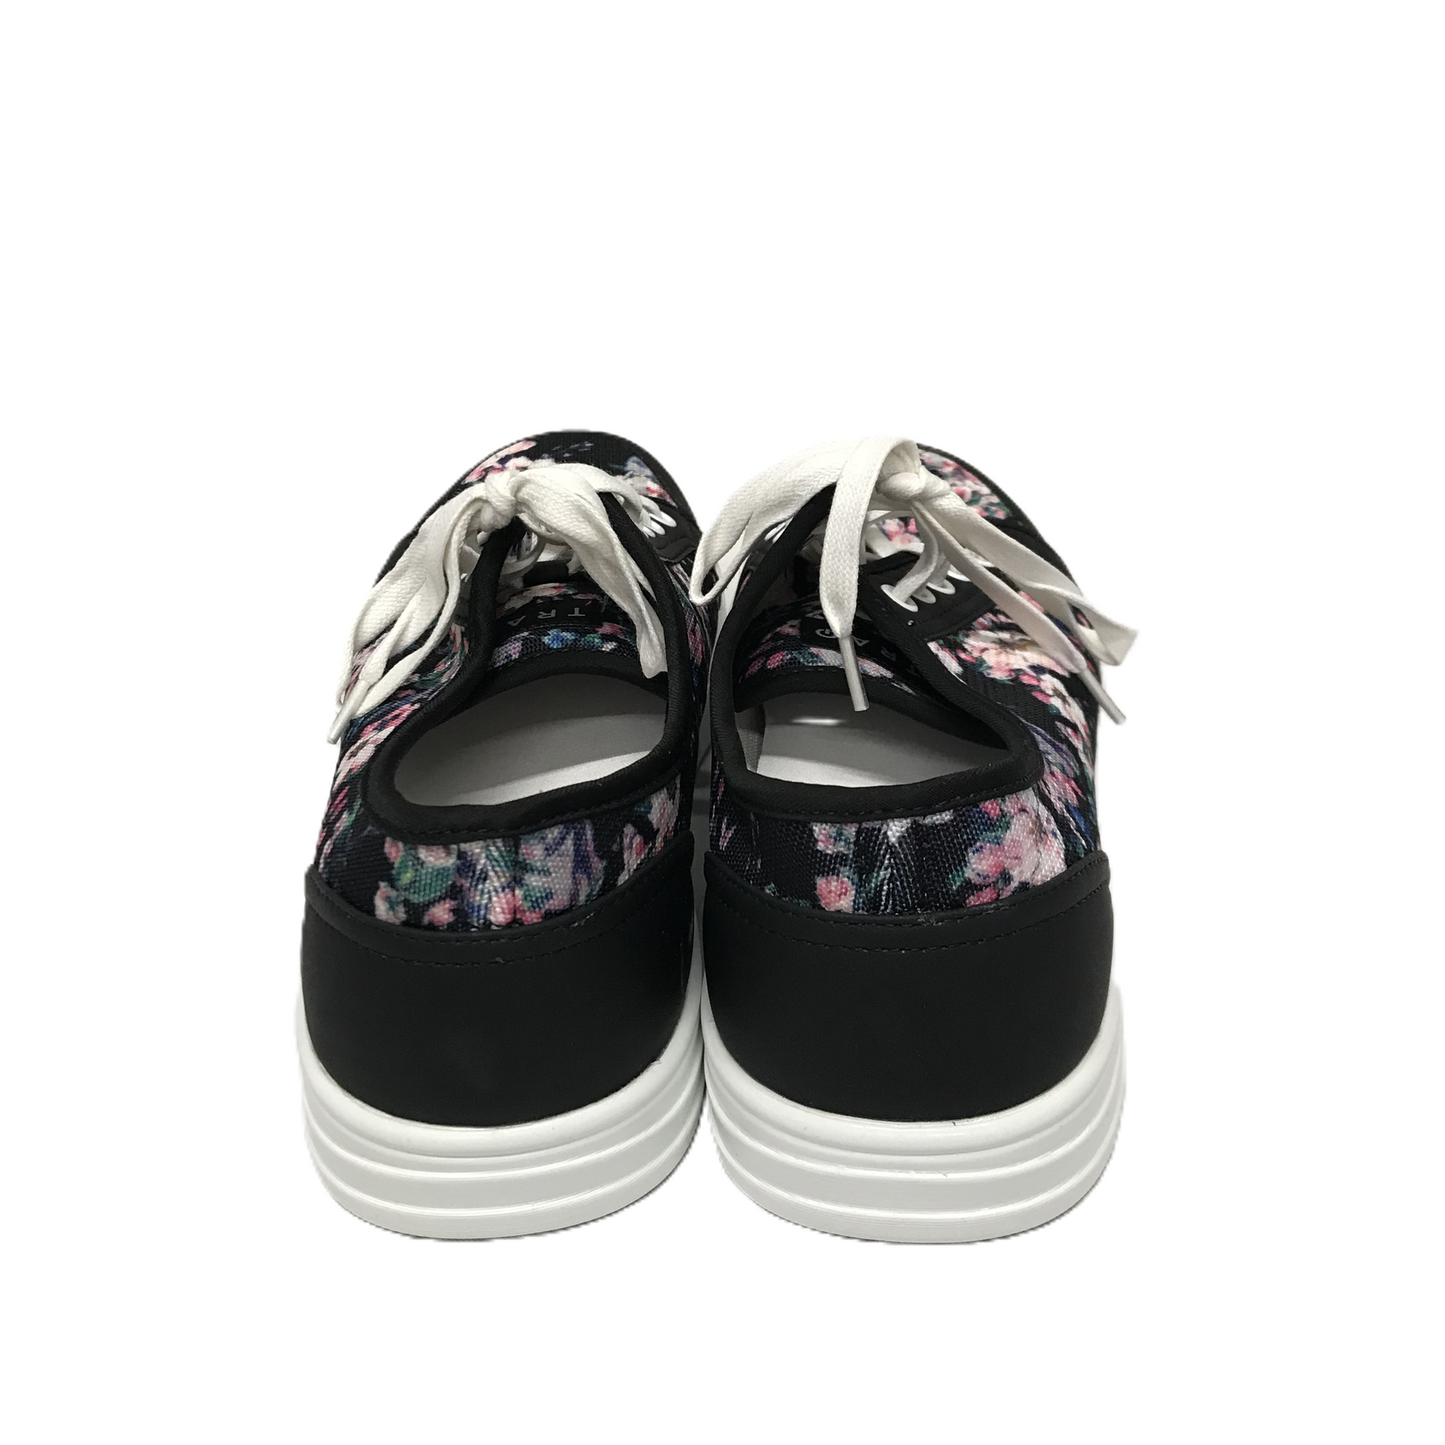 Black Shoes Sneakers By Alegria, Size: 9.5